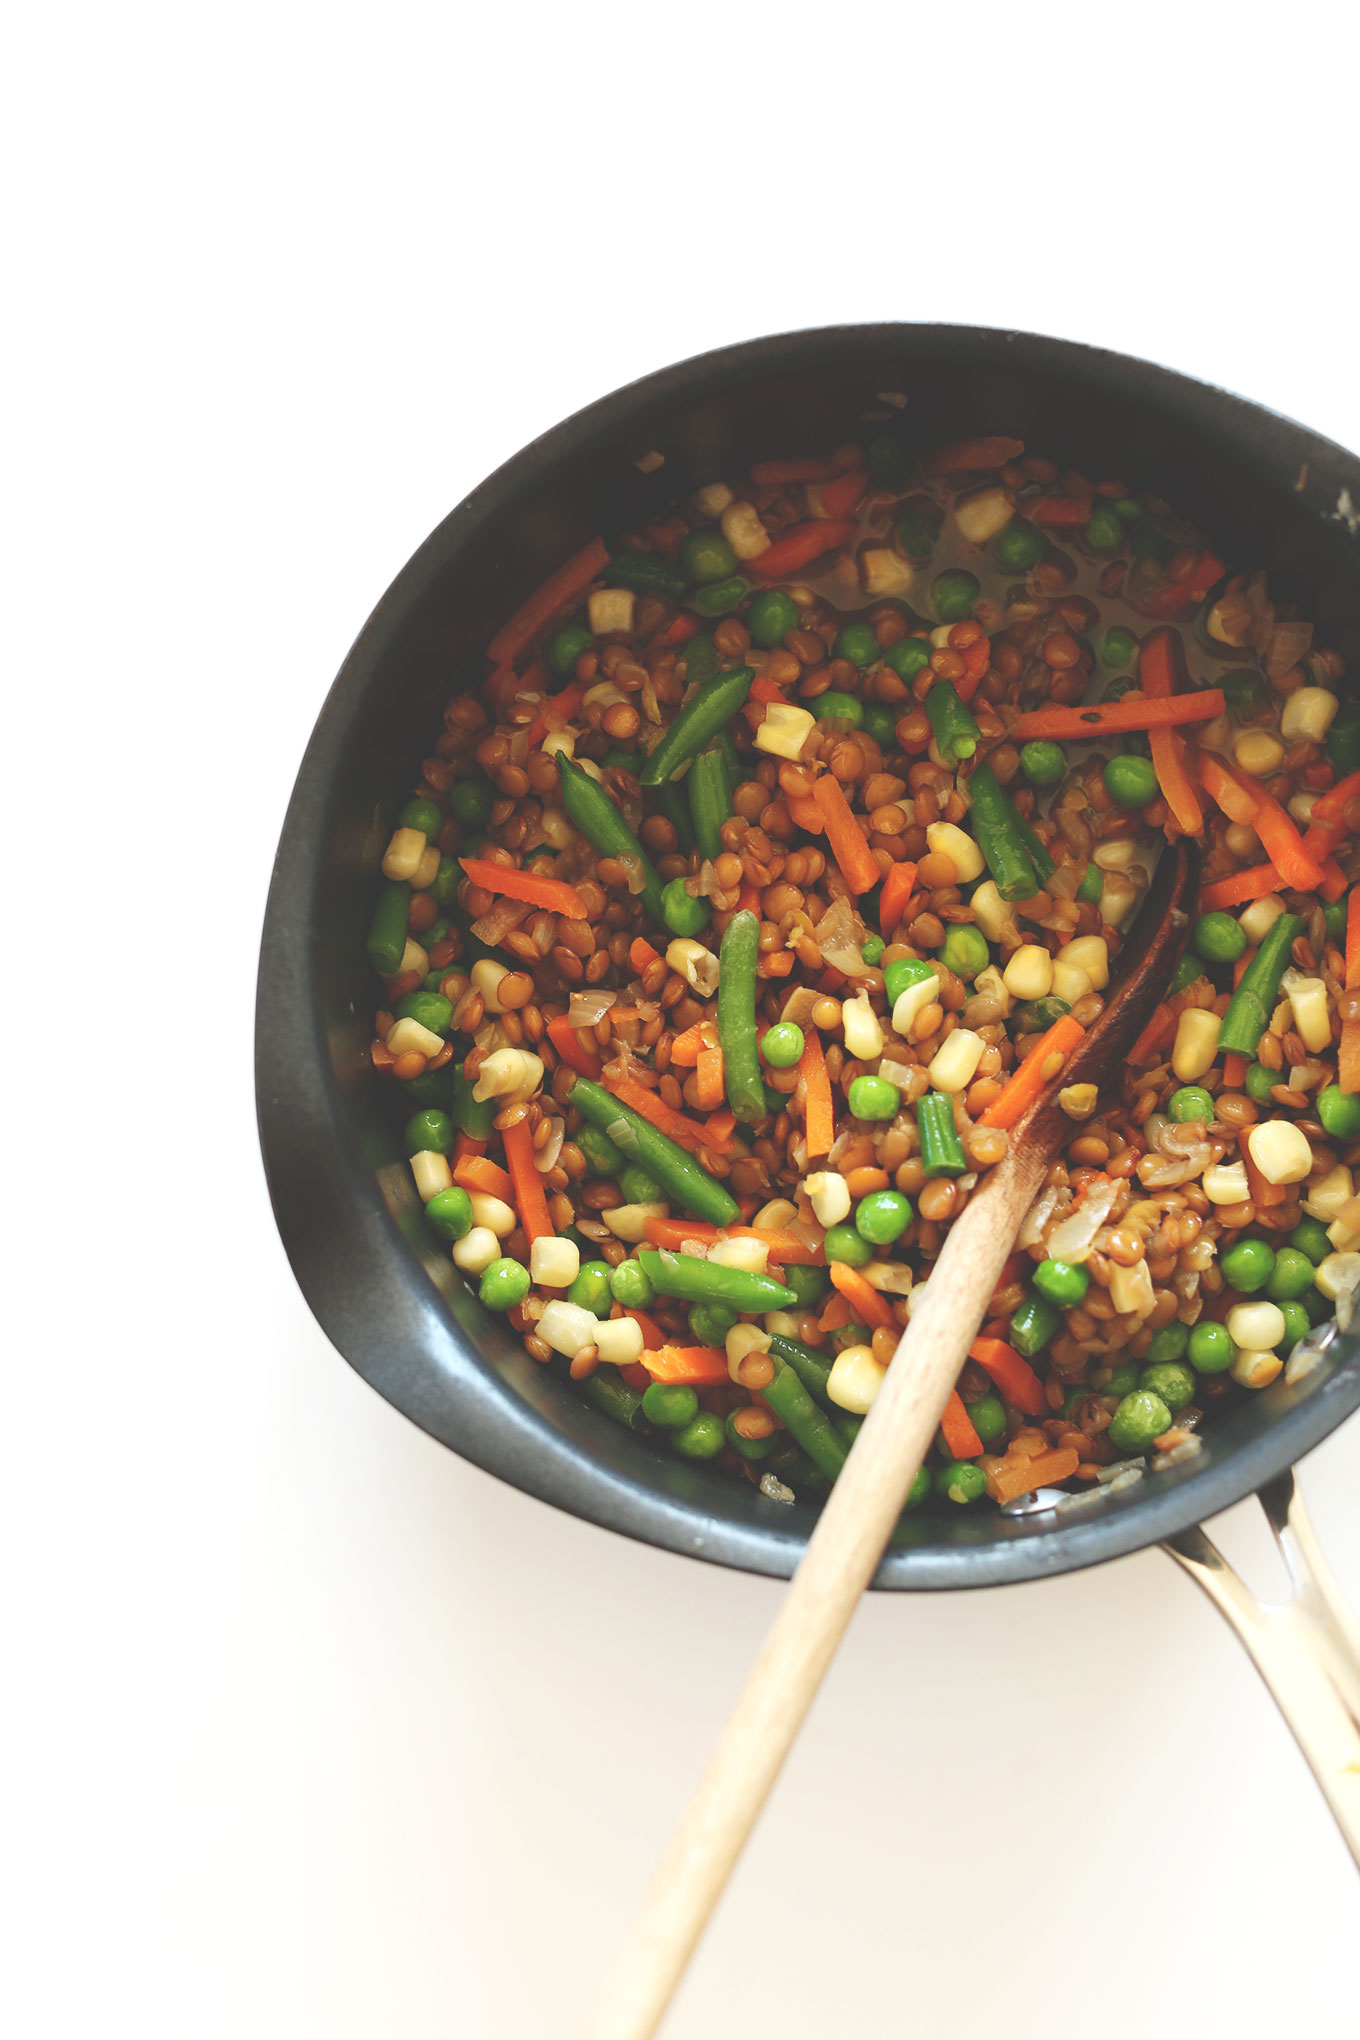 Using a wooden spoon to stir together lentils and vegetables for homemade Vegan Shepherd's Pie